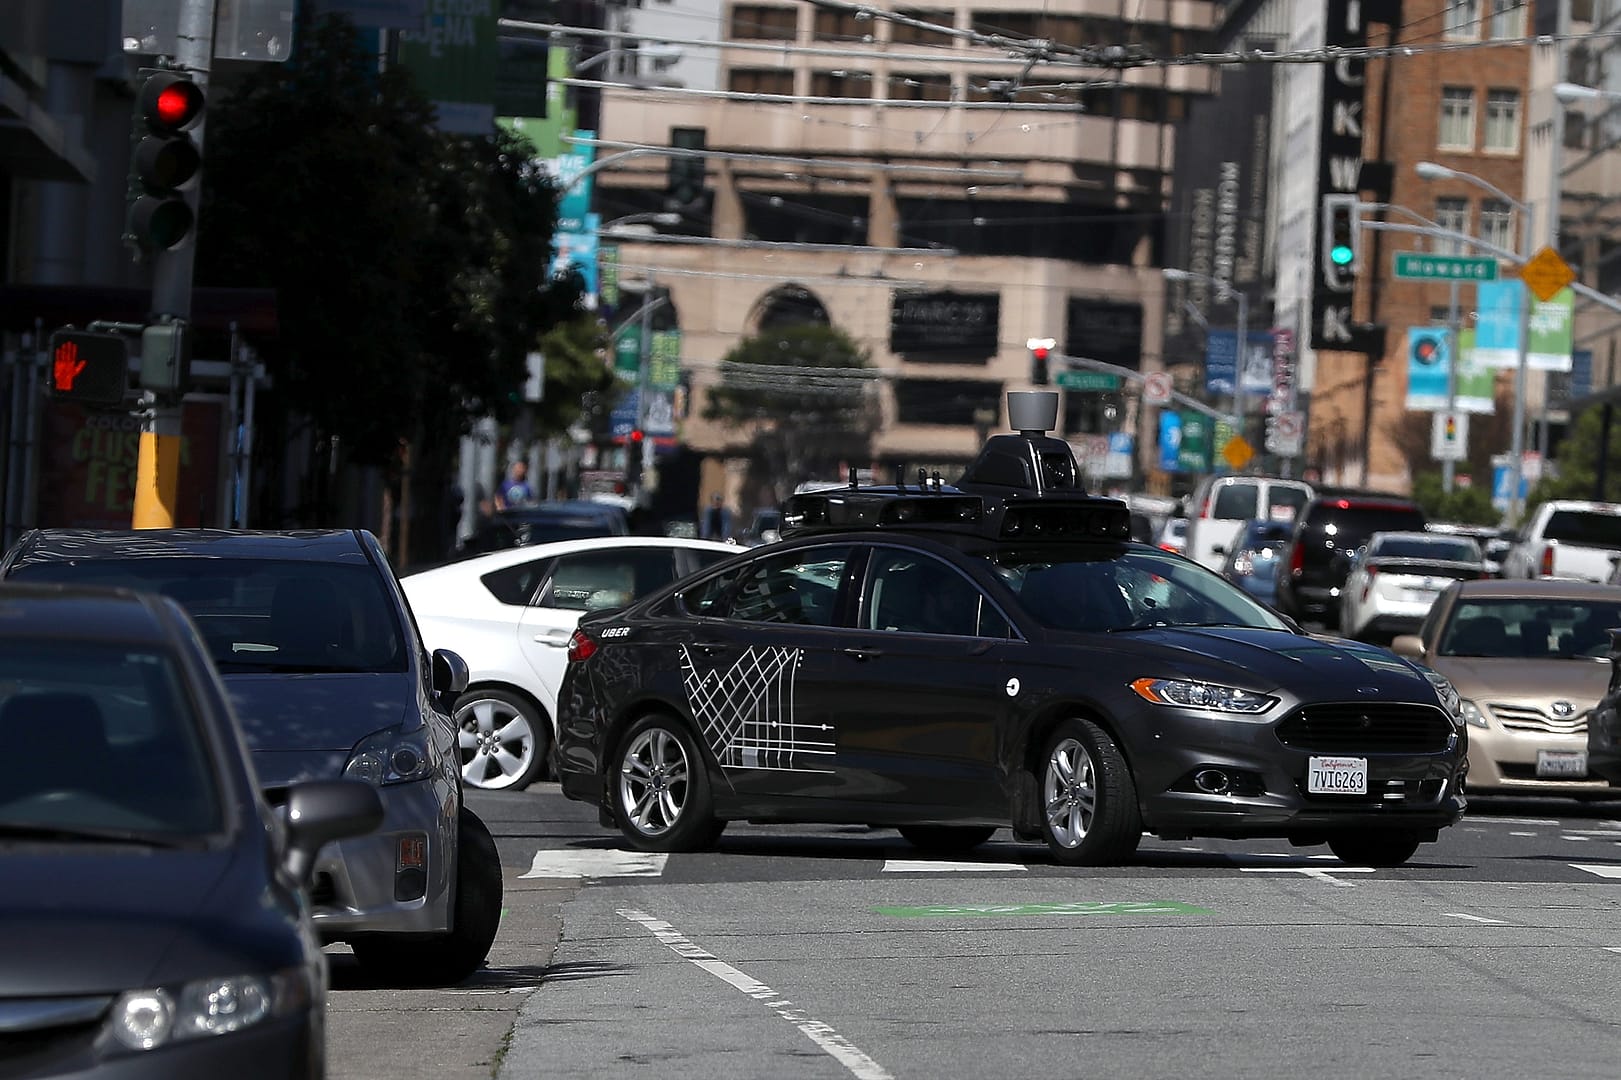 SAN FRANCISCO, CA - MARCH 28:  An Uber self-driving car drives down 5th Street on March 28, 2017 in San Francisco, California. Cars in Uber's self-driving cars are back on the roads after the program was temporarily halted following a crash in Tempe, Arizona on Friday.  (Photo by Justin Sullivan/Getty Images)